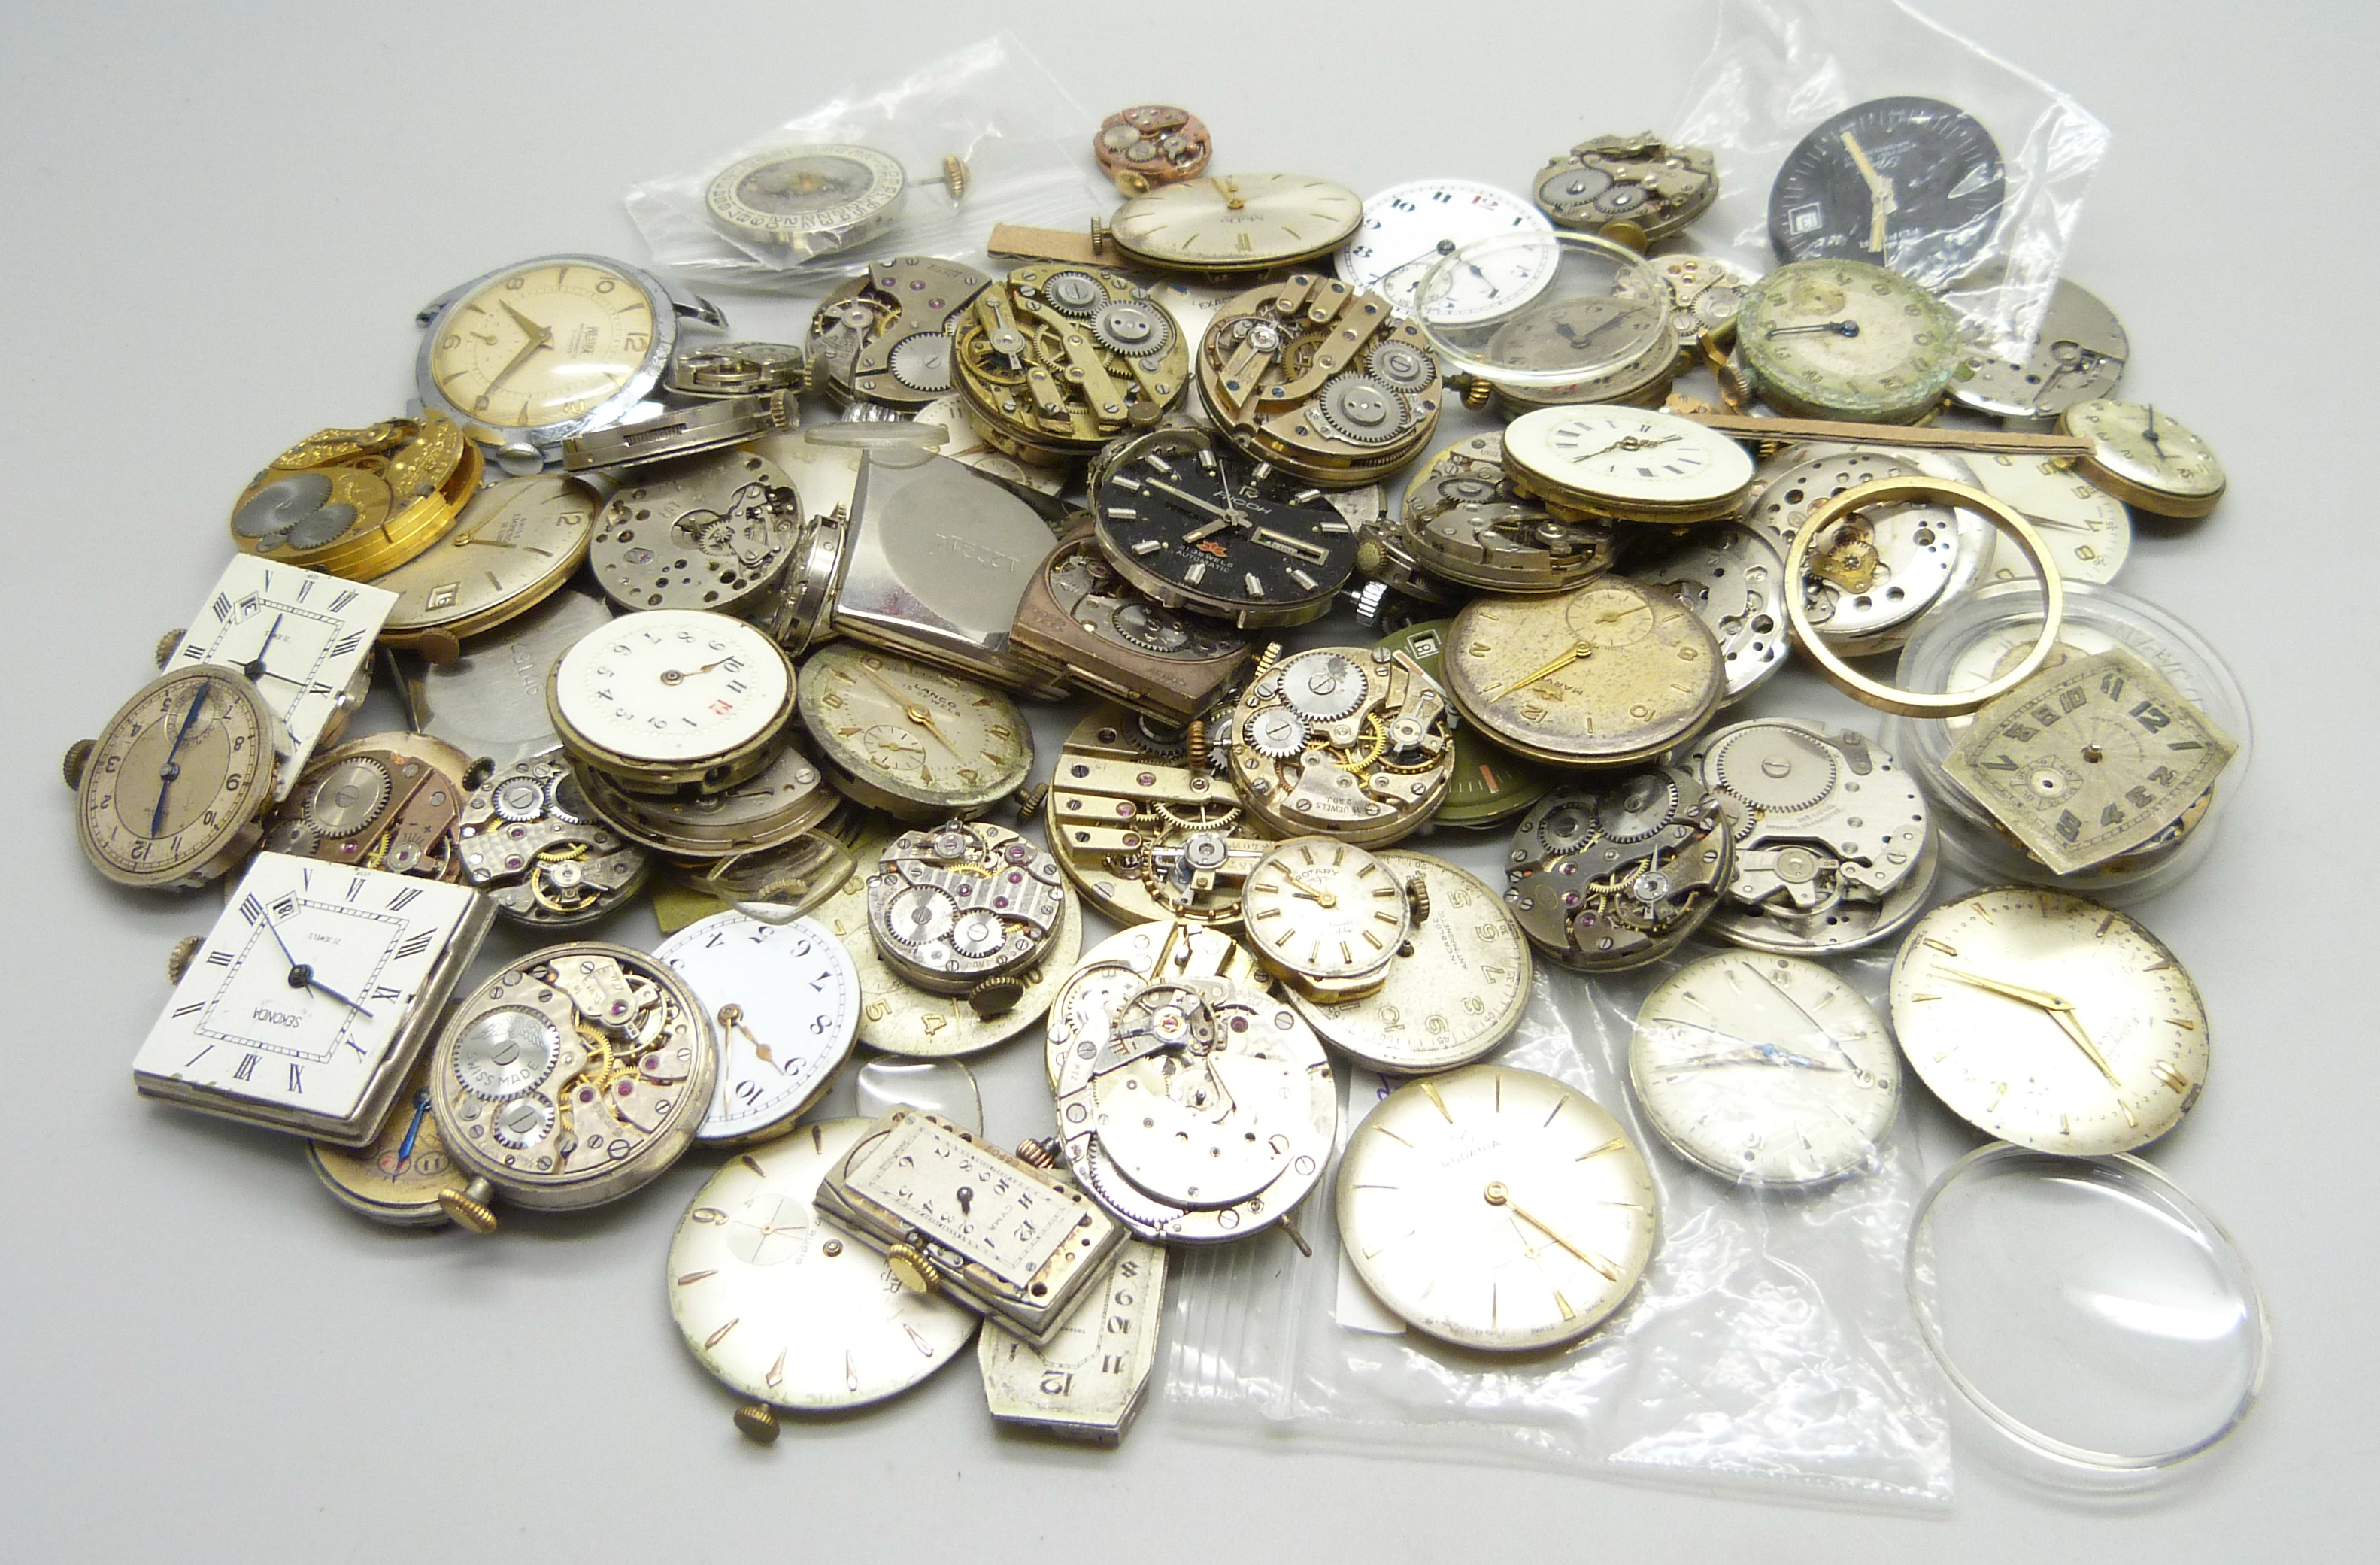 A collection of wristwatch movements